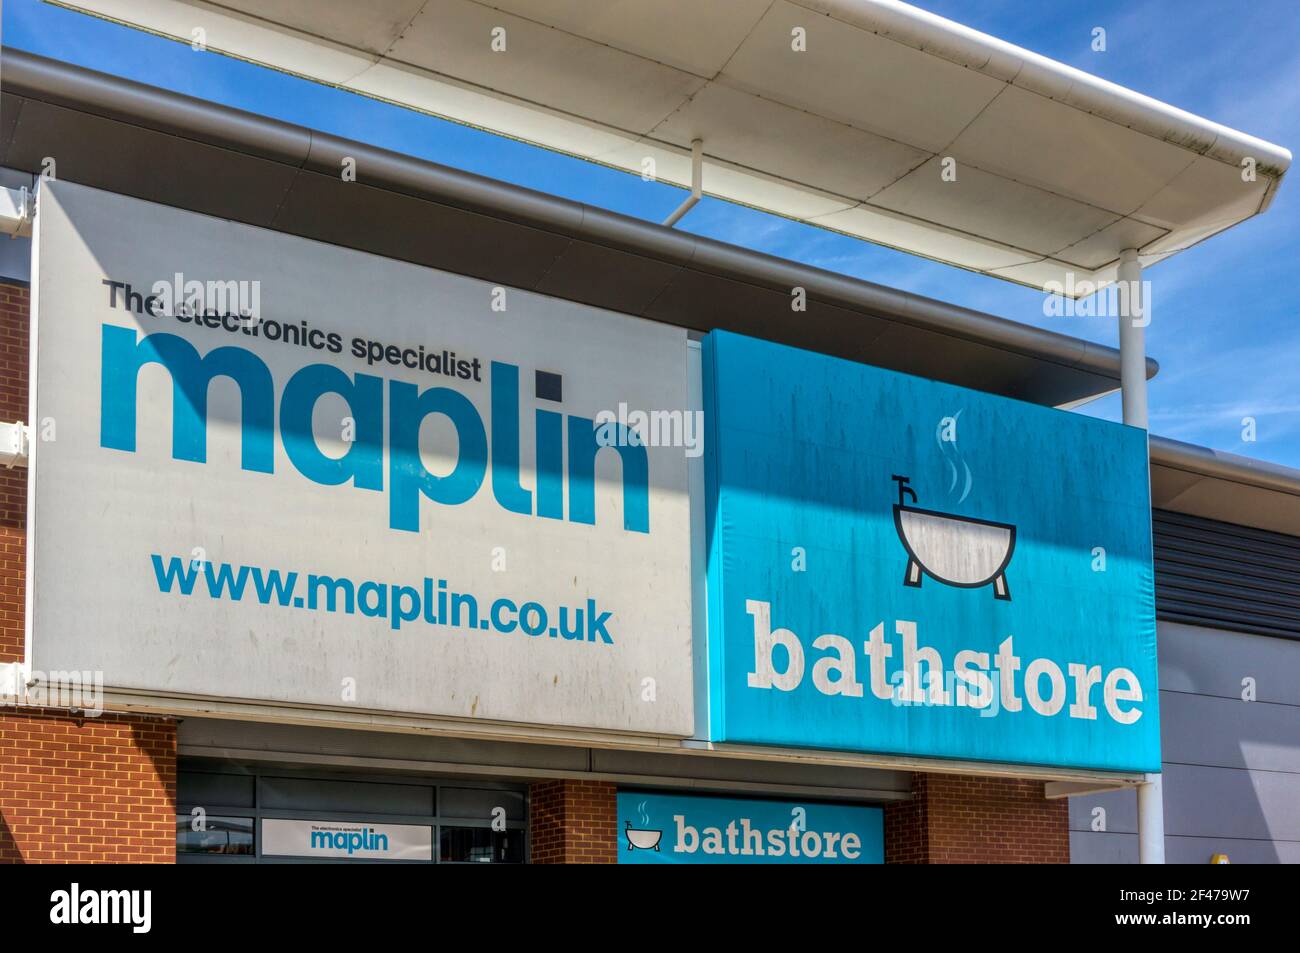 Large Maplin and Bathstore signs at a shopping centre. Stock Photo